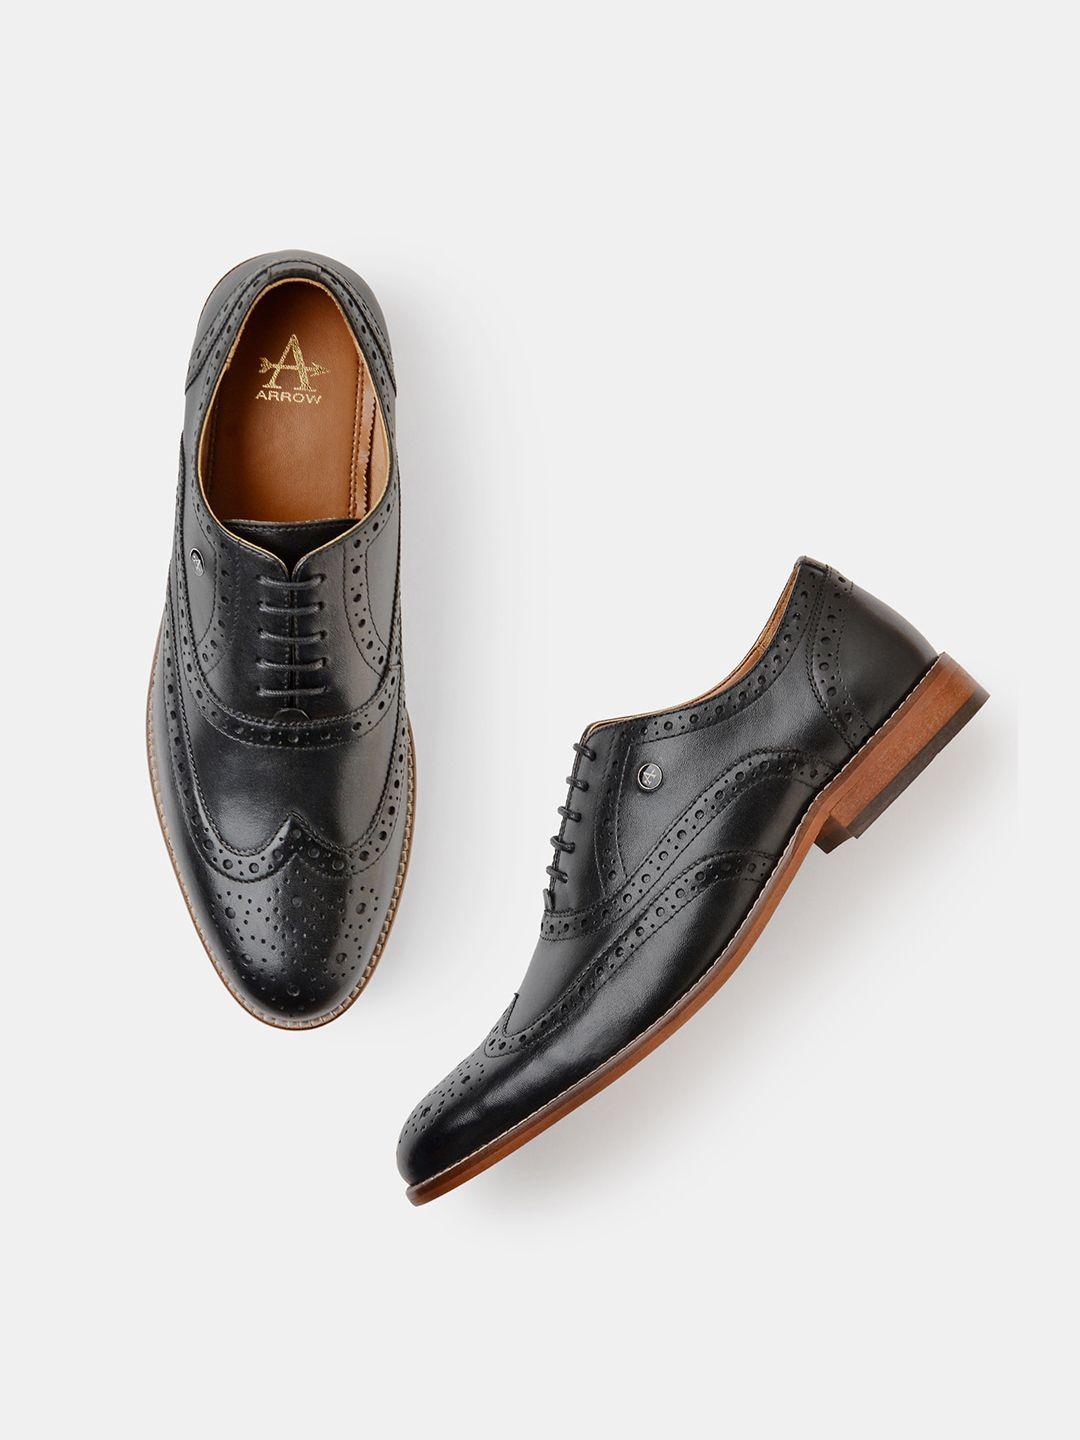 arrow-men-charter-perforated-leather-formal-brogues